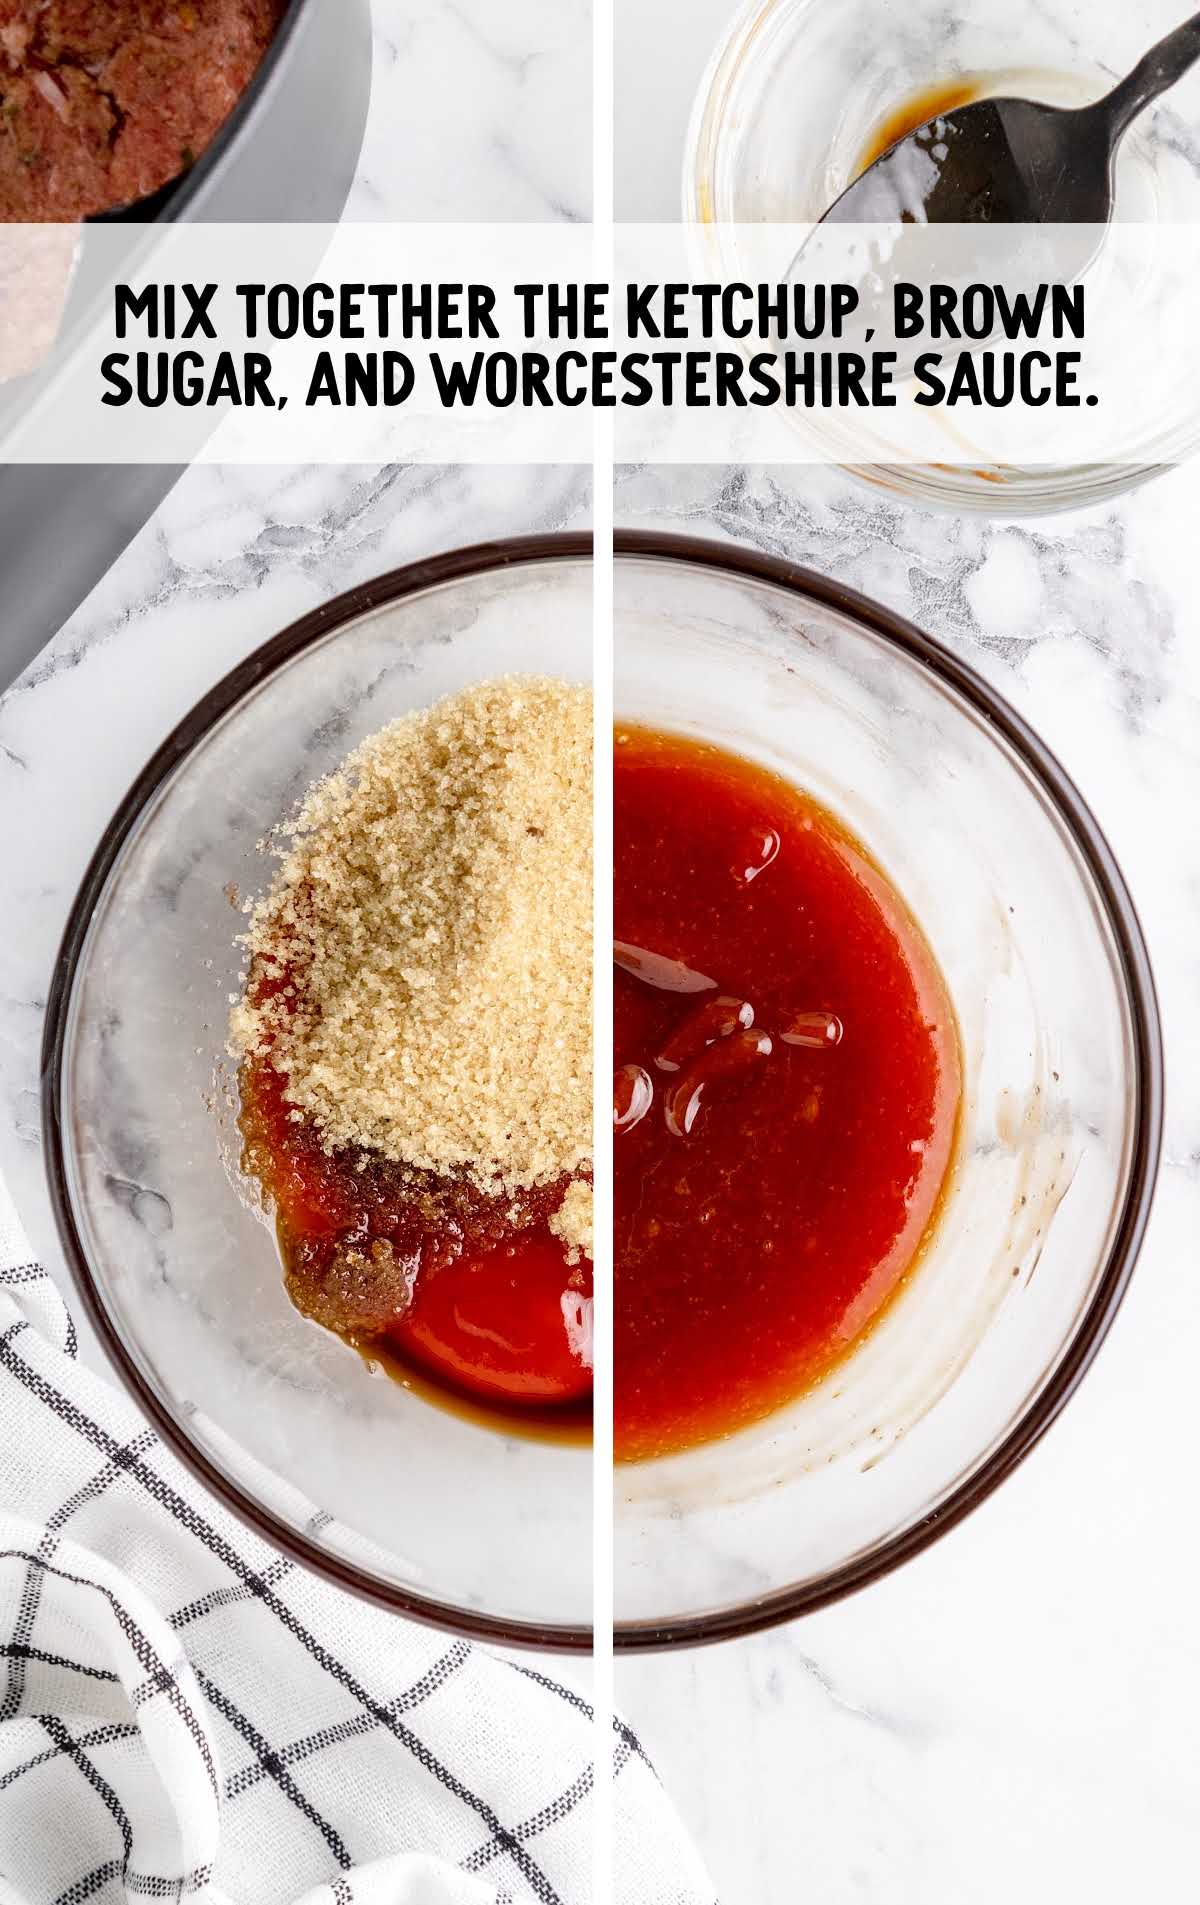 ketchup, brown sugar, and Worcestershire sauce mixed together